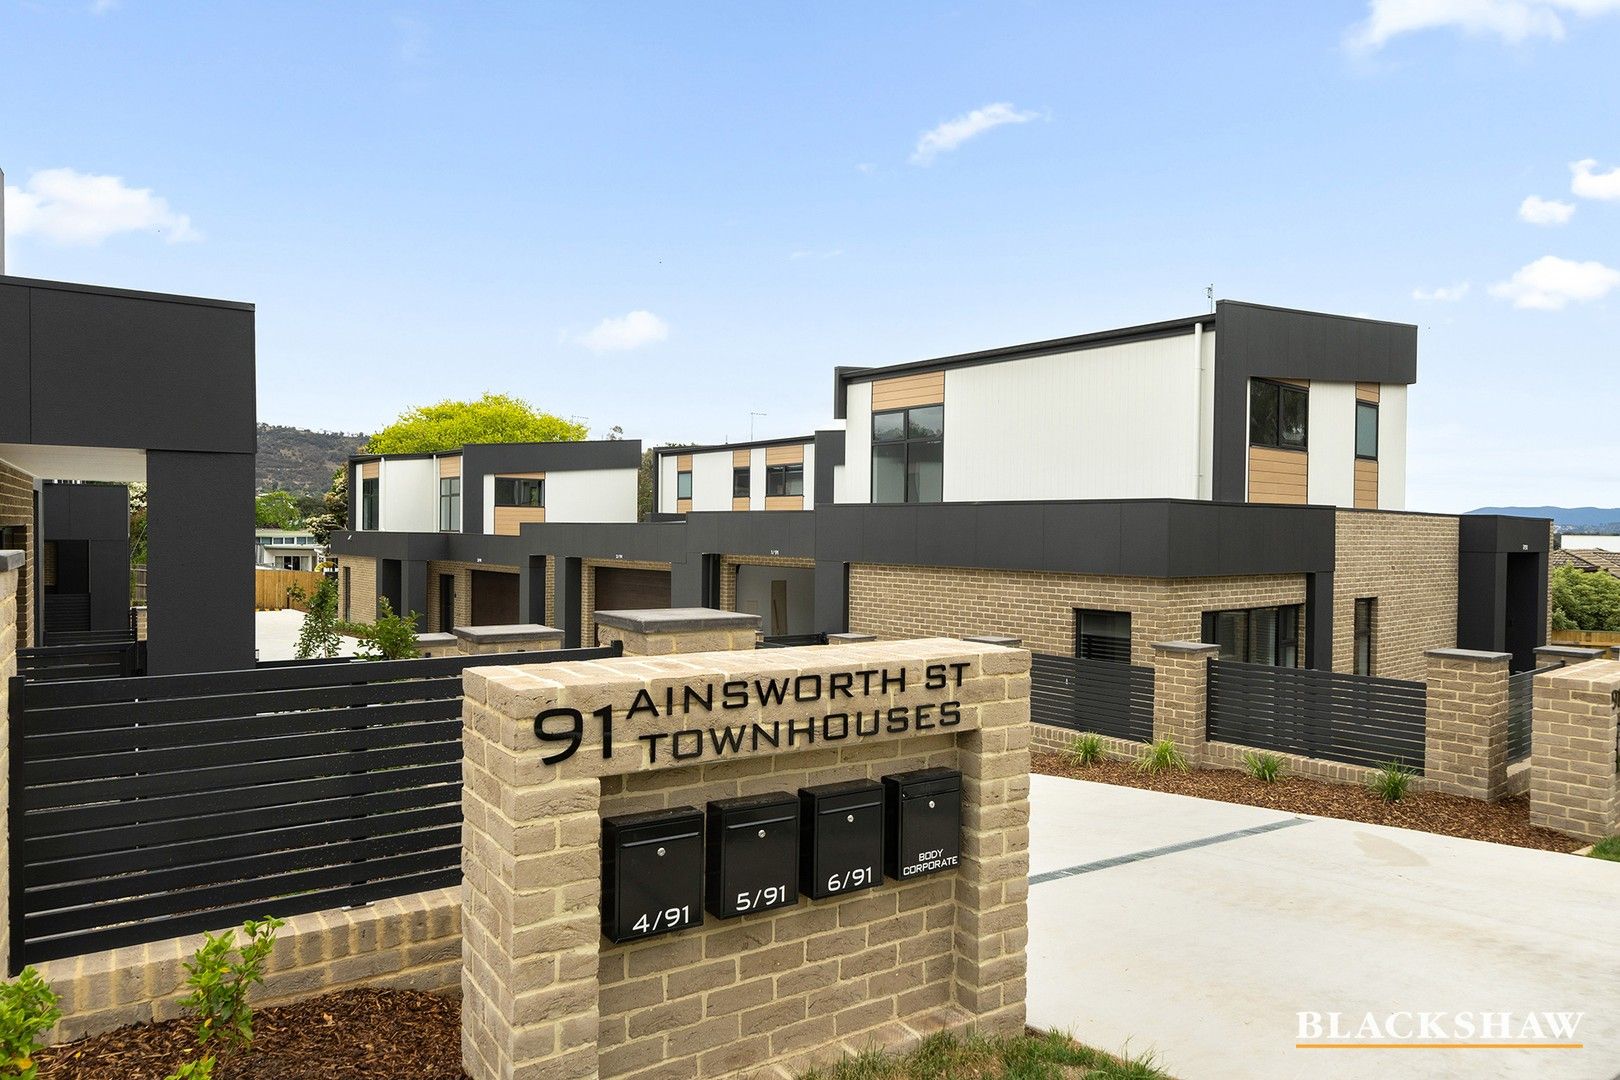 3 bedrooms Townhouse in 2/91 Ainsworth Street MAWSON ACT, 2607